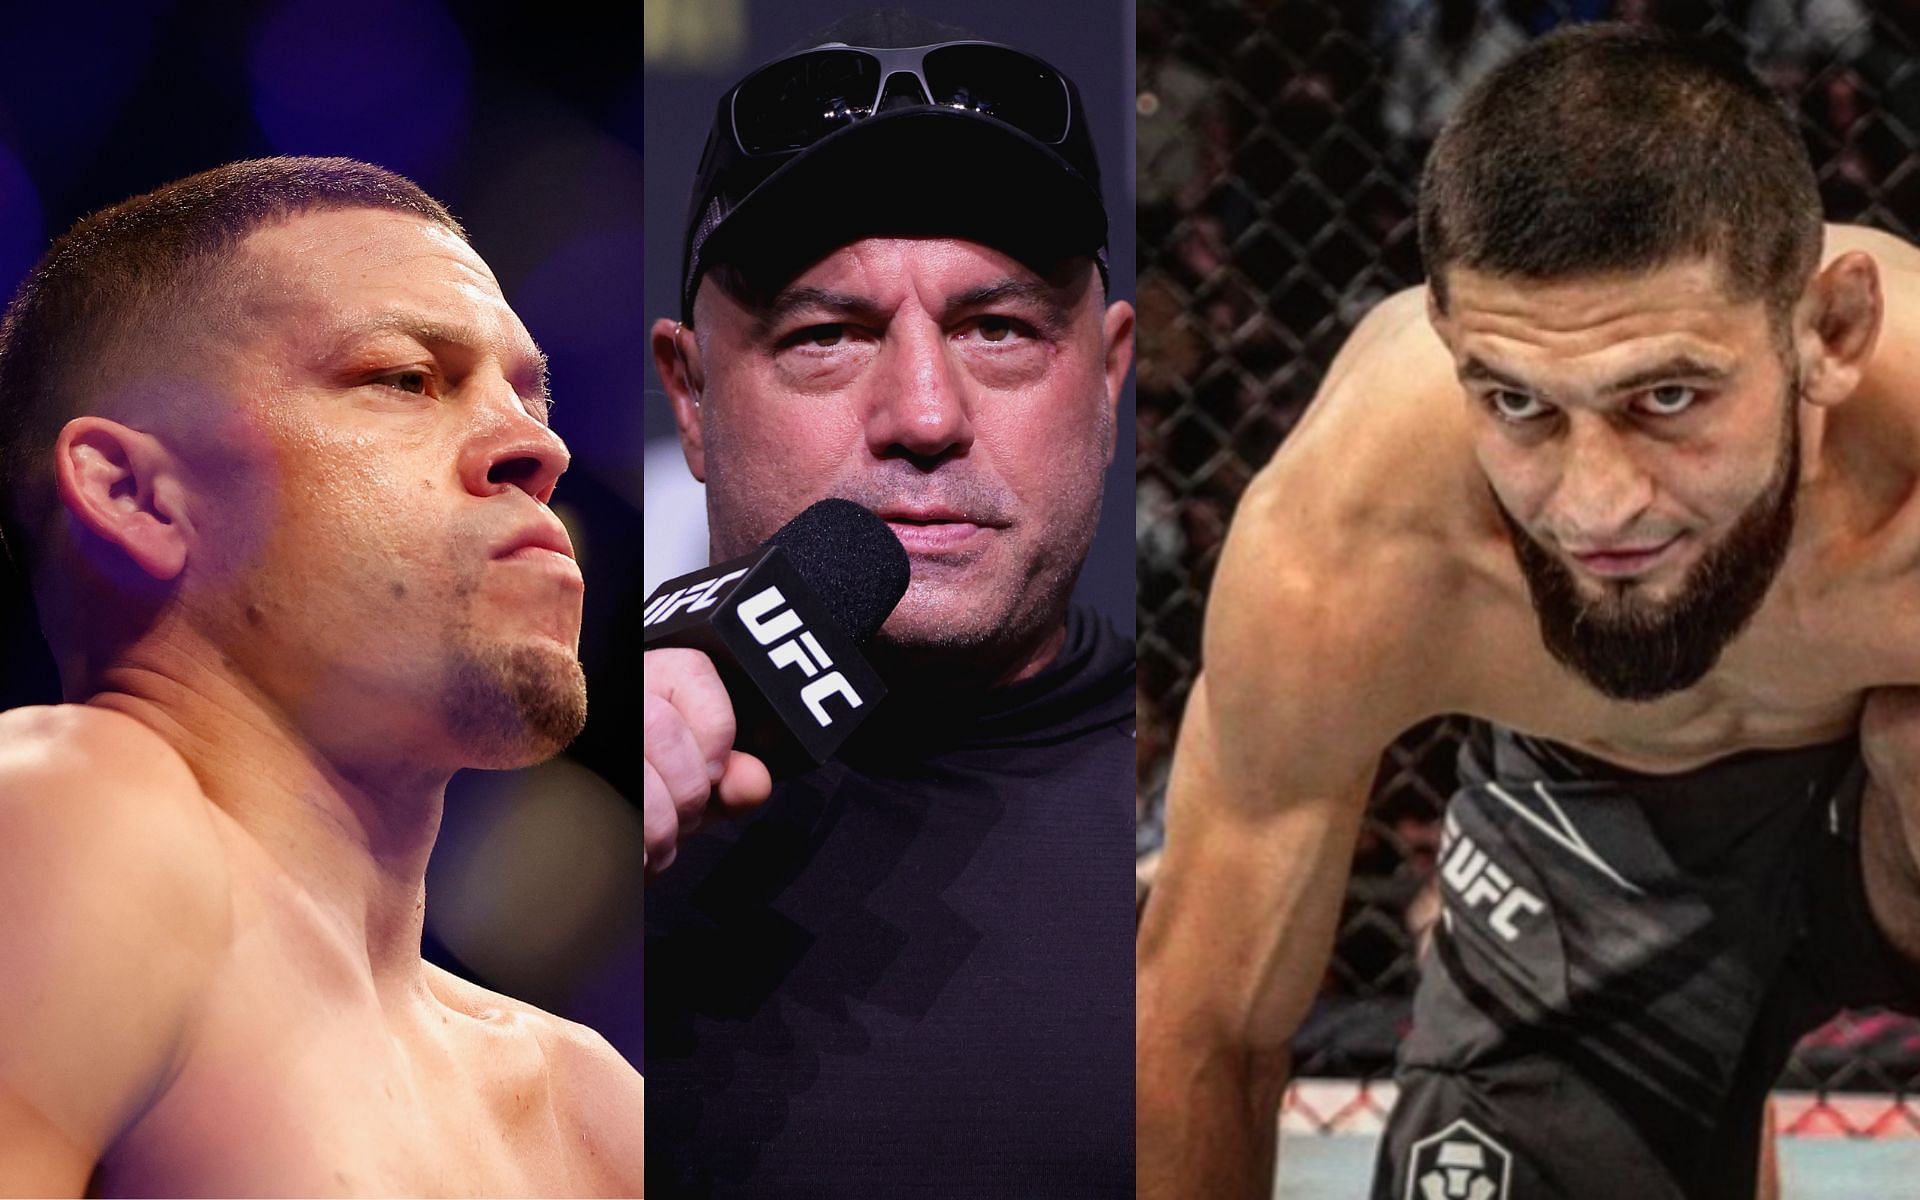 Nate Diaz (left), Joe Rogan (center), and Khamzat Chimaev (right). [Images courtesy: right image from Khamzat Chimaev&#039;s Instagram, center and left images from Getty Images]